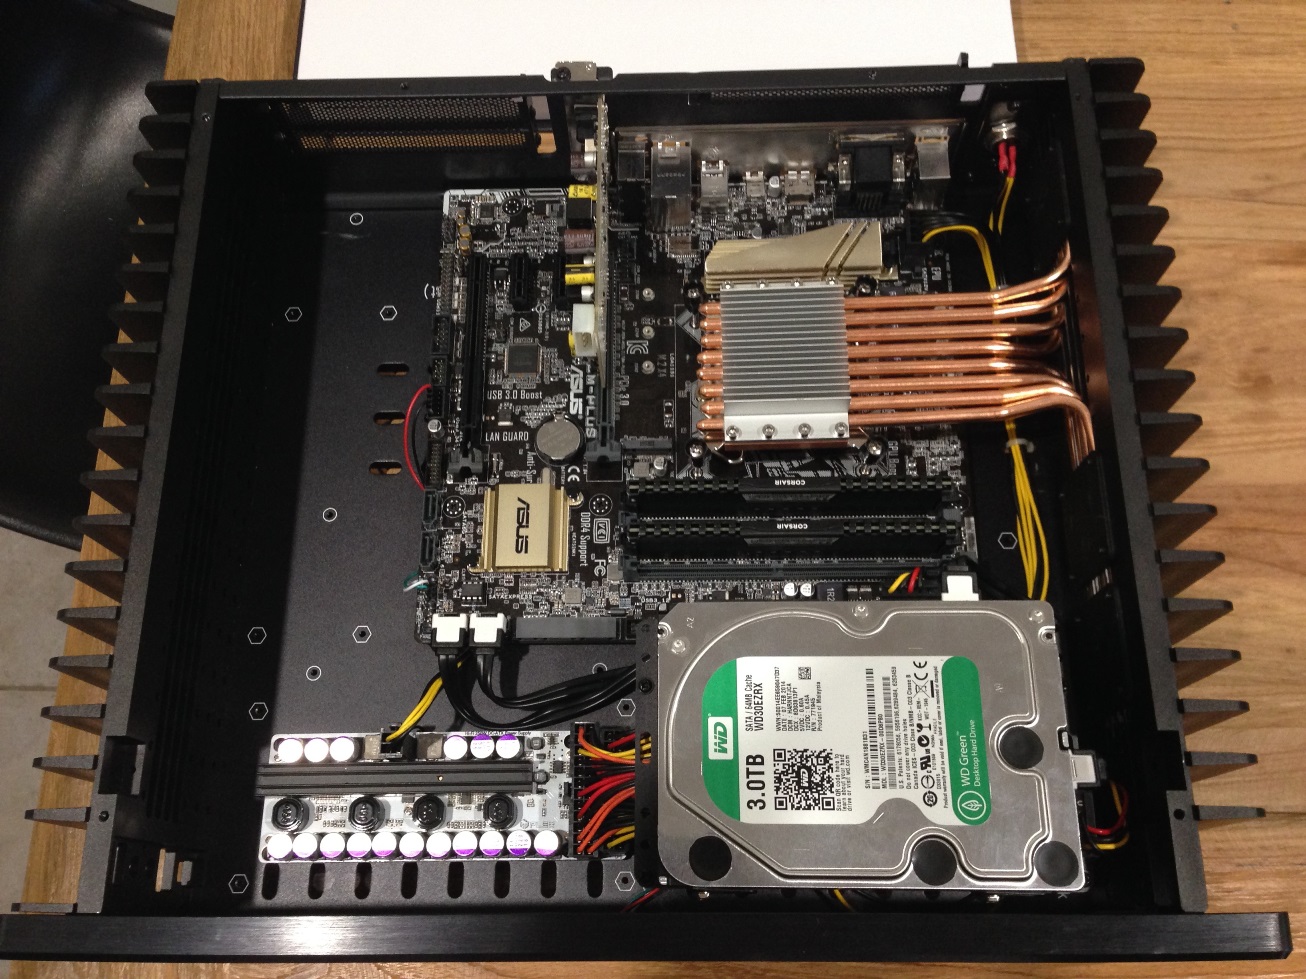 HDPLEX 2nd Gen H5 fanless PC case with SoTM USB card and Intel 6100T